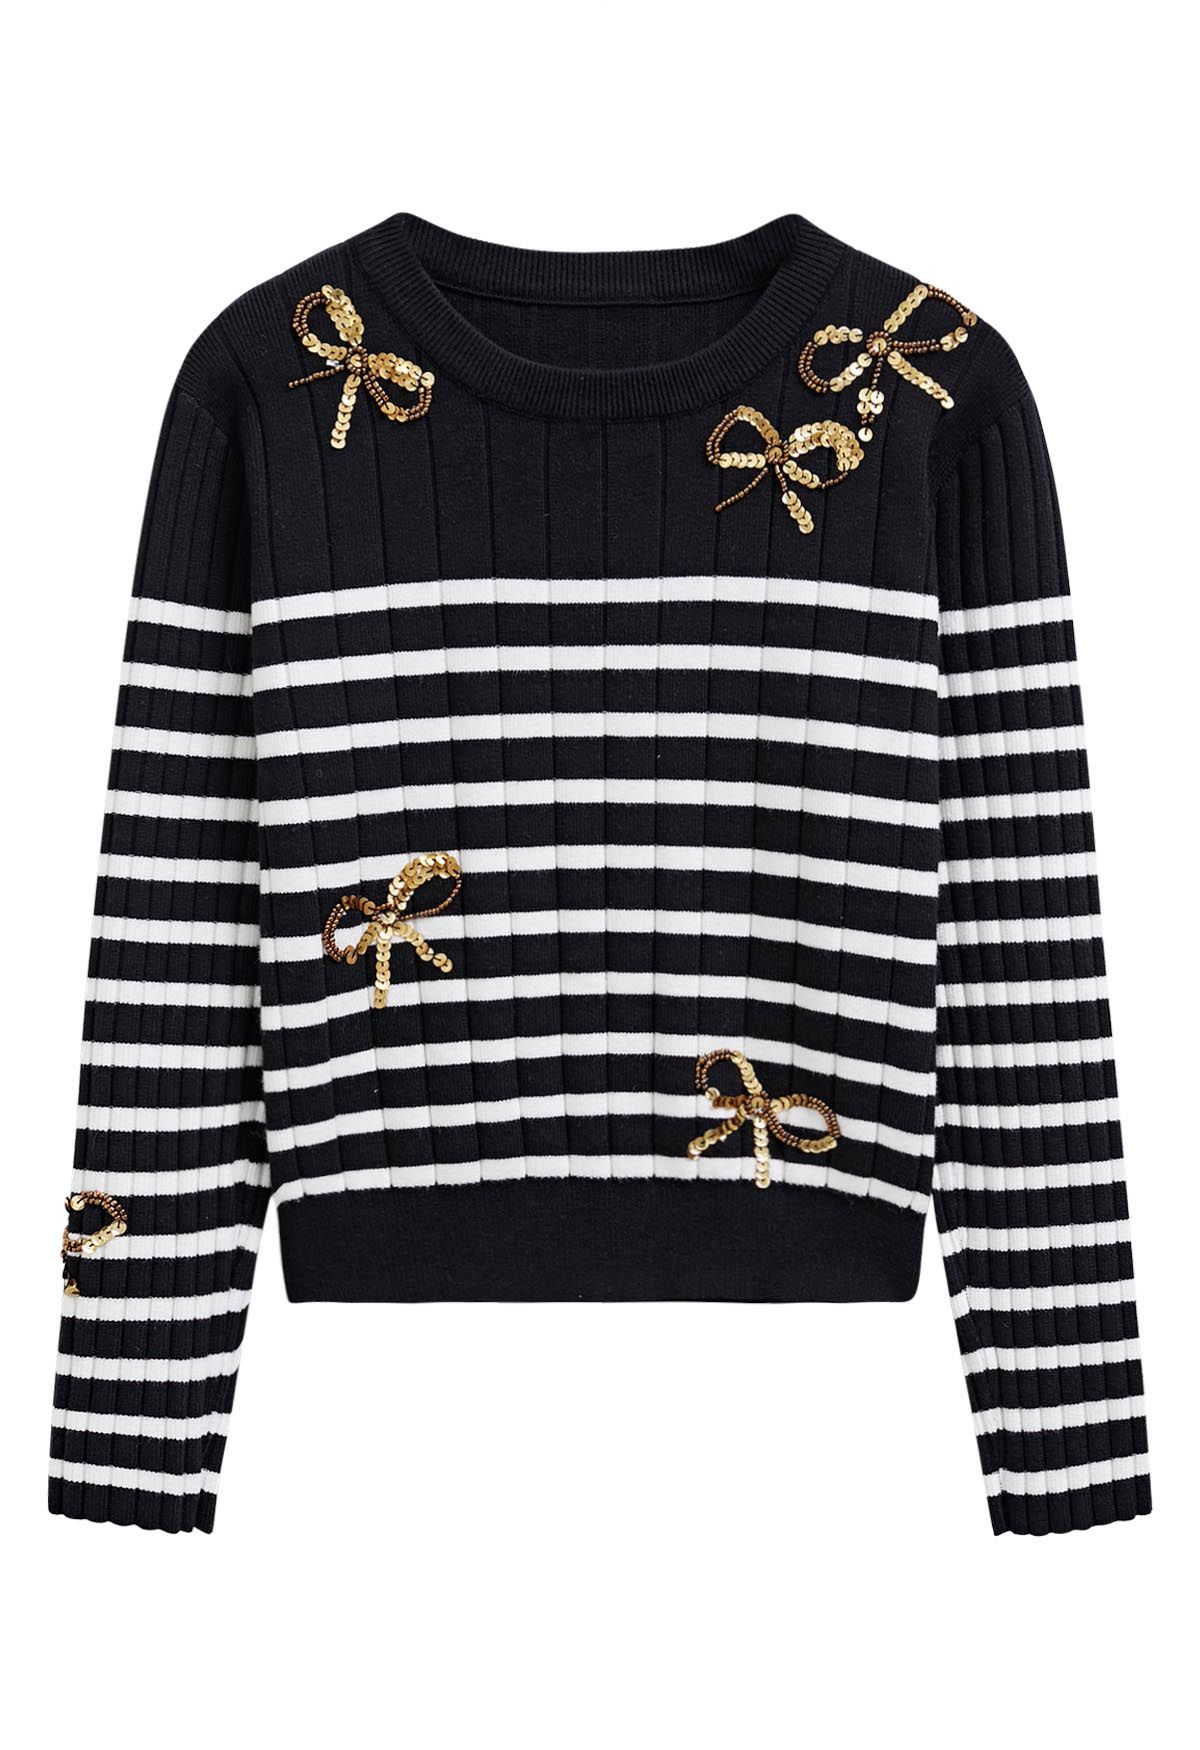 Sequin Beaded Bowknot Striped Knit Sweater in Black